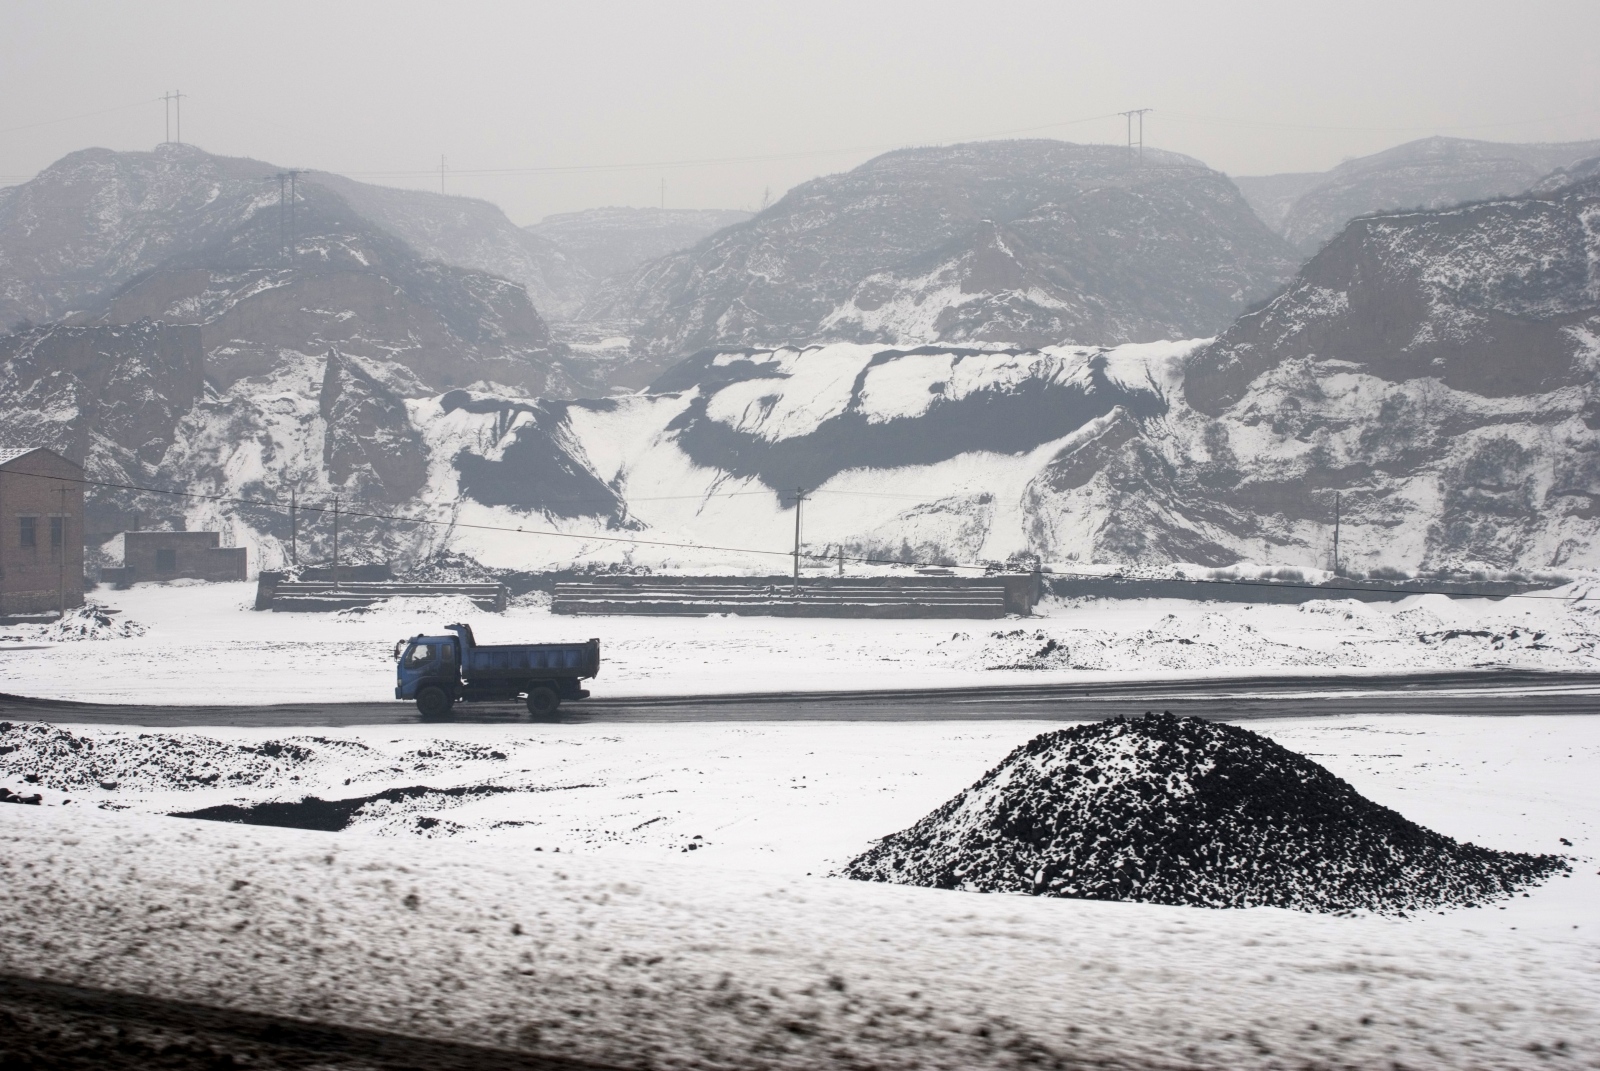 THE LOST VALLEY - North China. Shanxi Province. Coal-mining area.